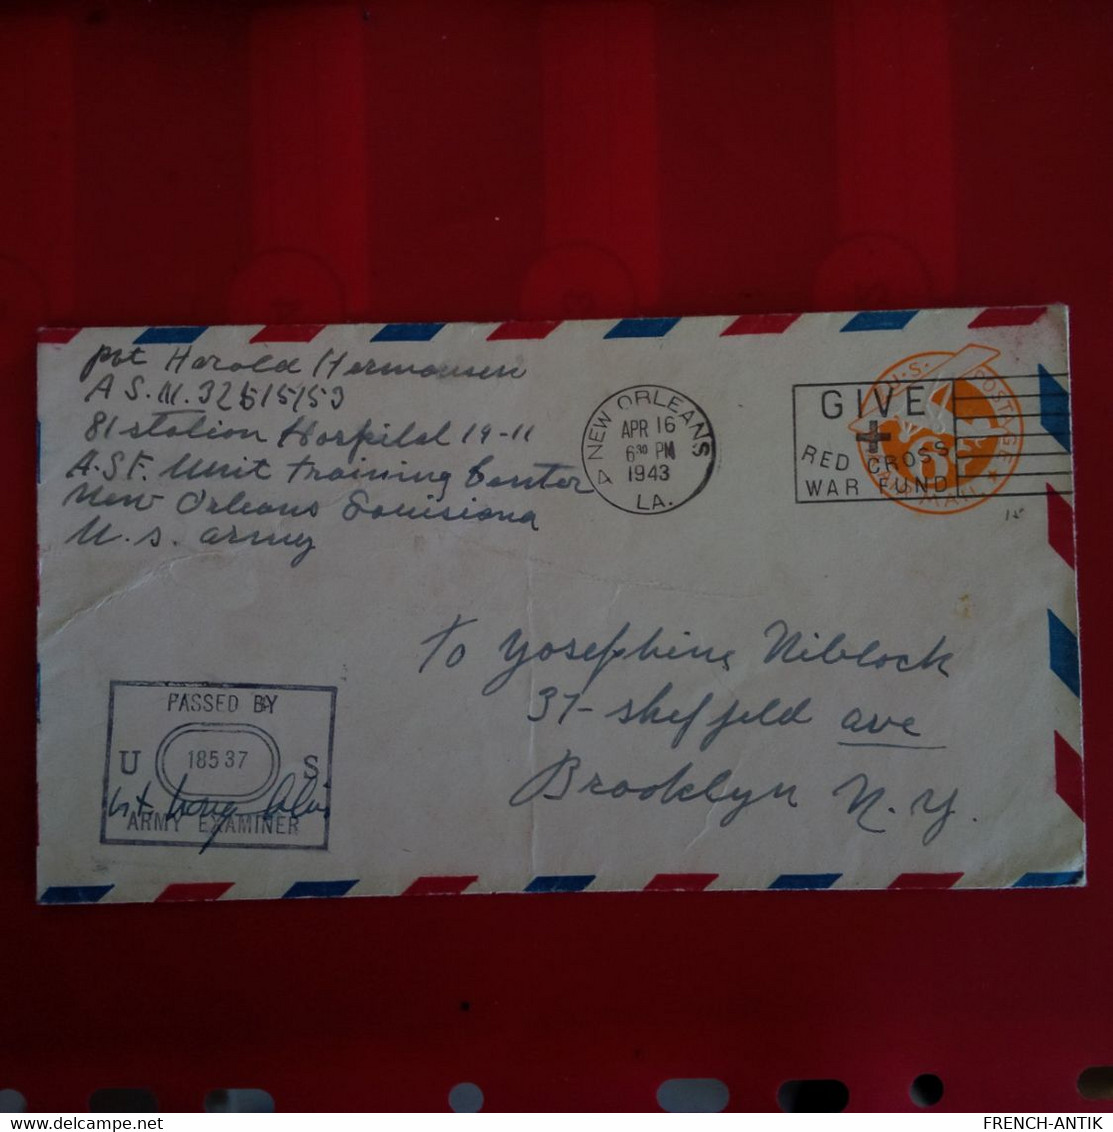 LETTRE NEW ORLEANS POUR BROOKLYN CACHET PASSED BY ARMY EXAMINER CACHET GIVE RED CROSS WAR FUND - Brieven En Documenten